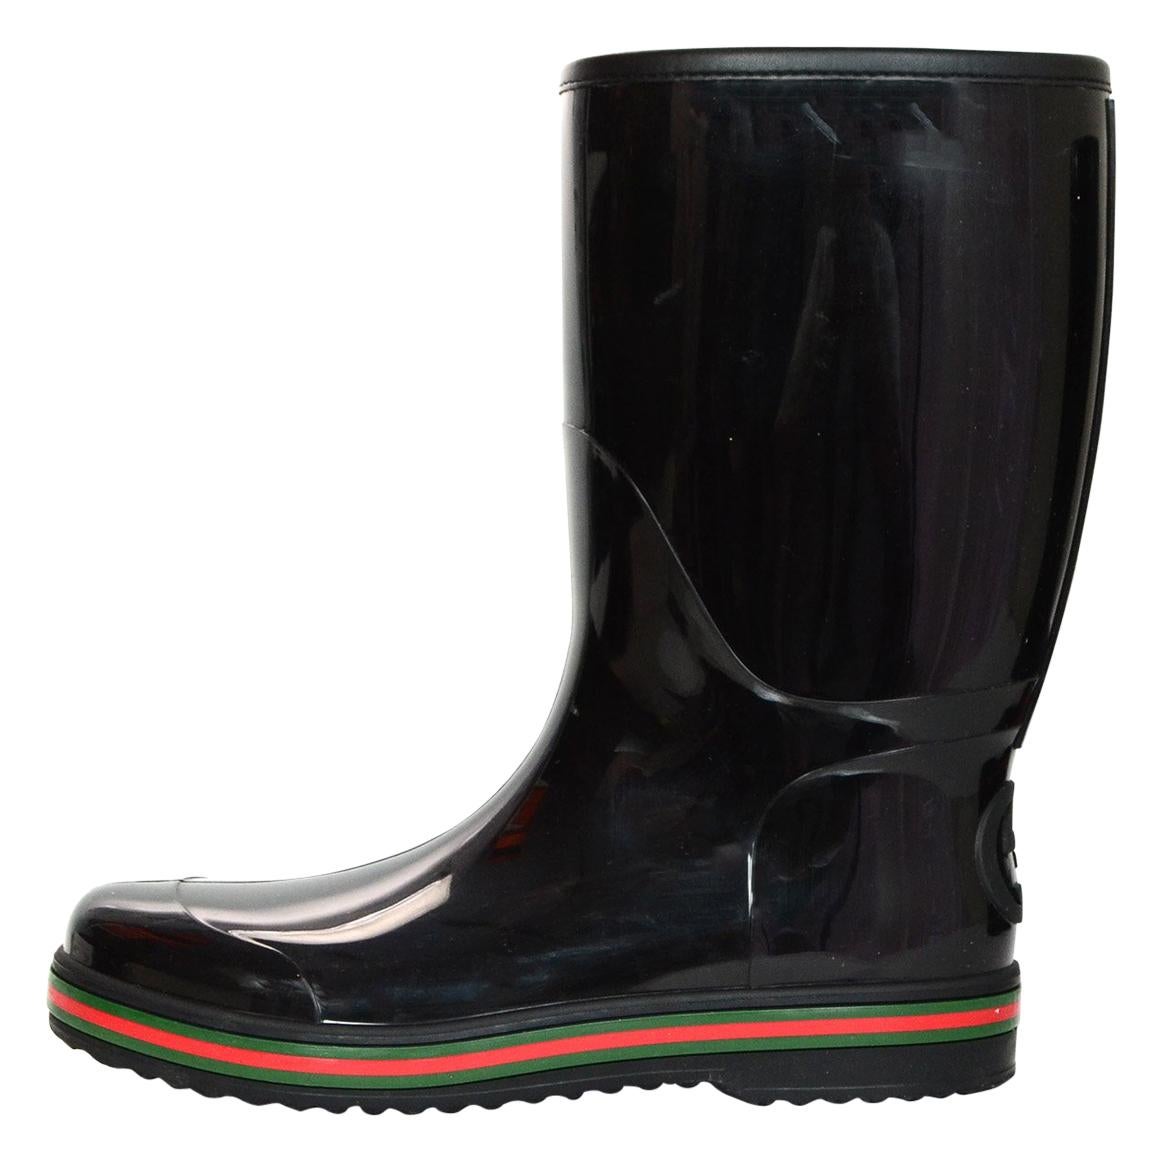 Gucci Black Rain Boots W/ Logo And Green & Red Detailing Mens Sz 11